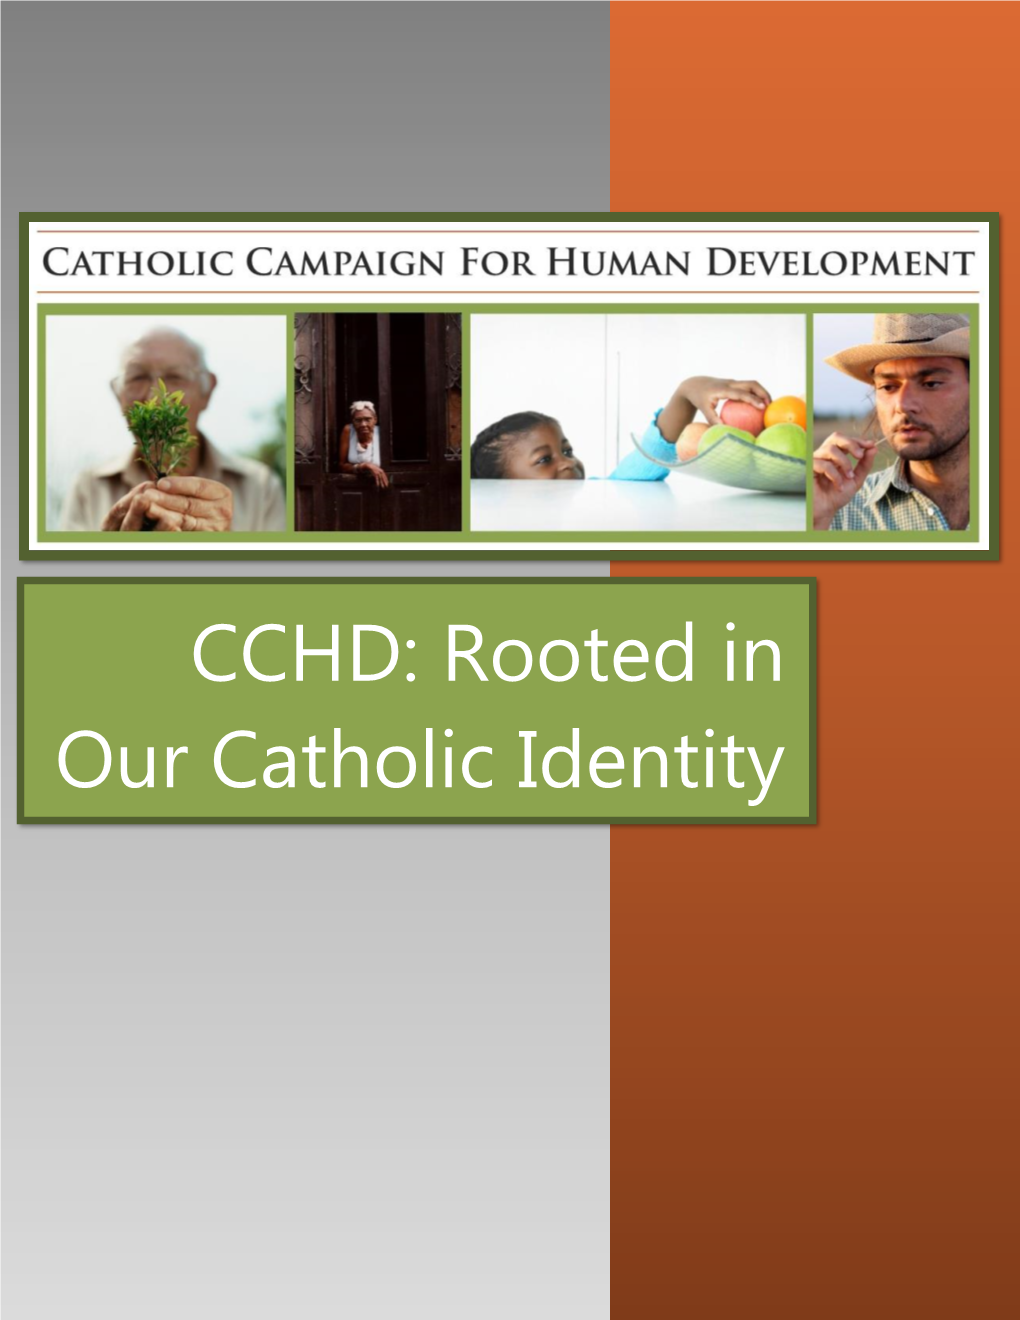 CCHD: Rooted in Our Catholic Identity